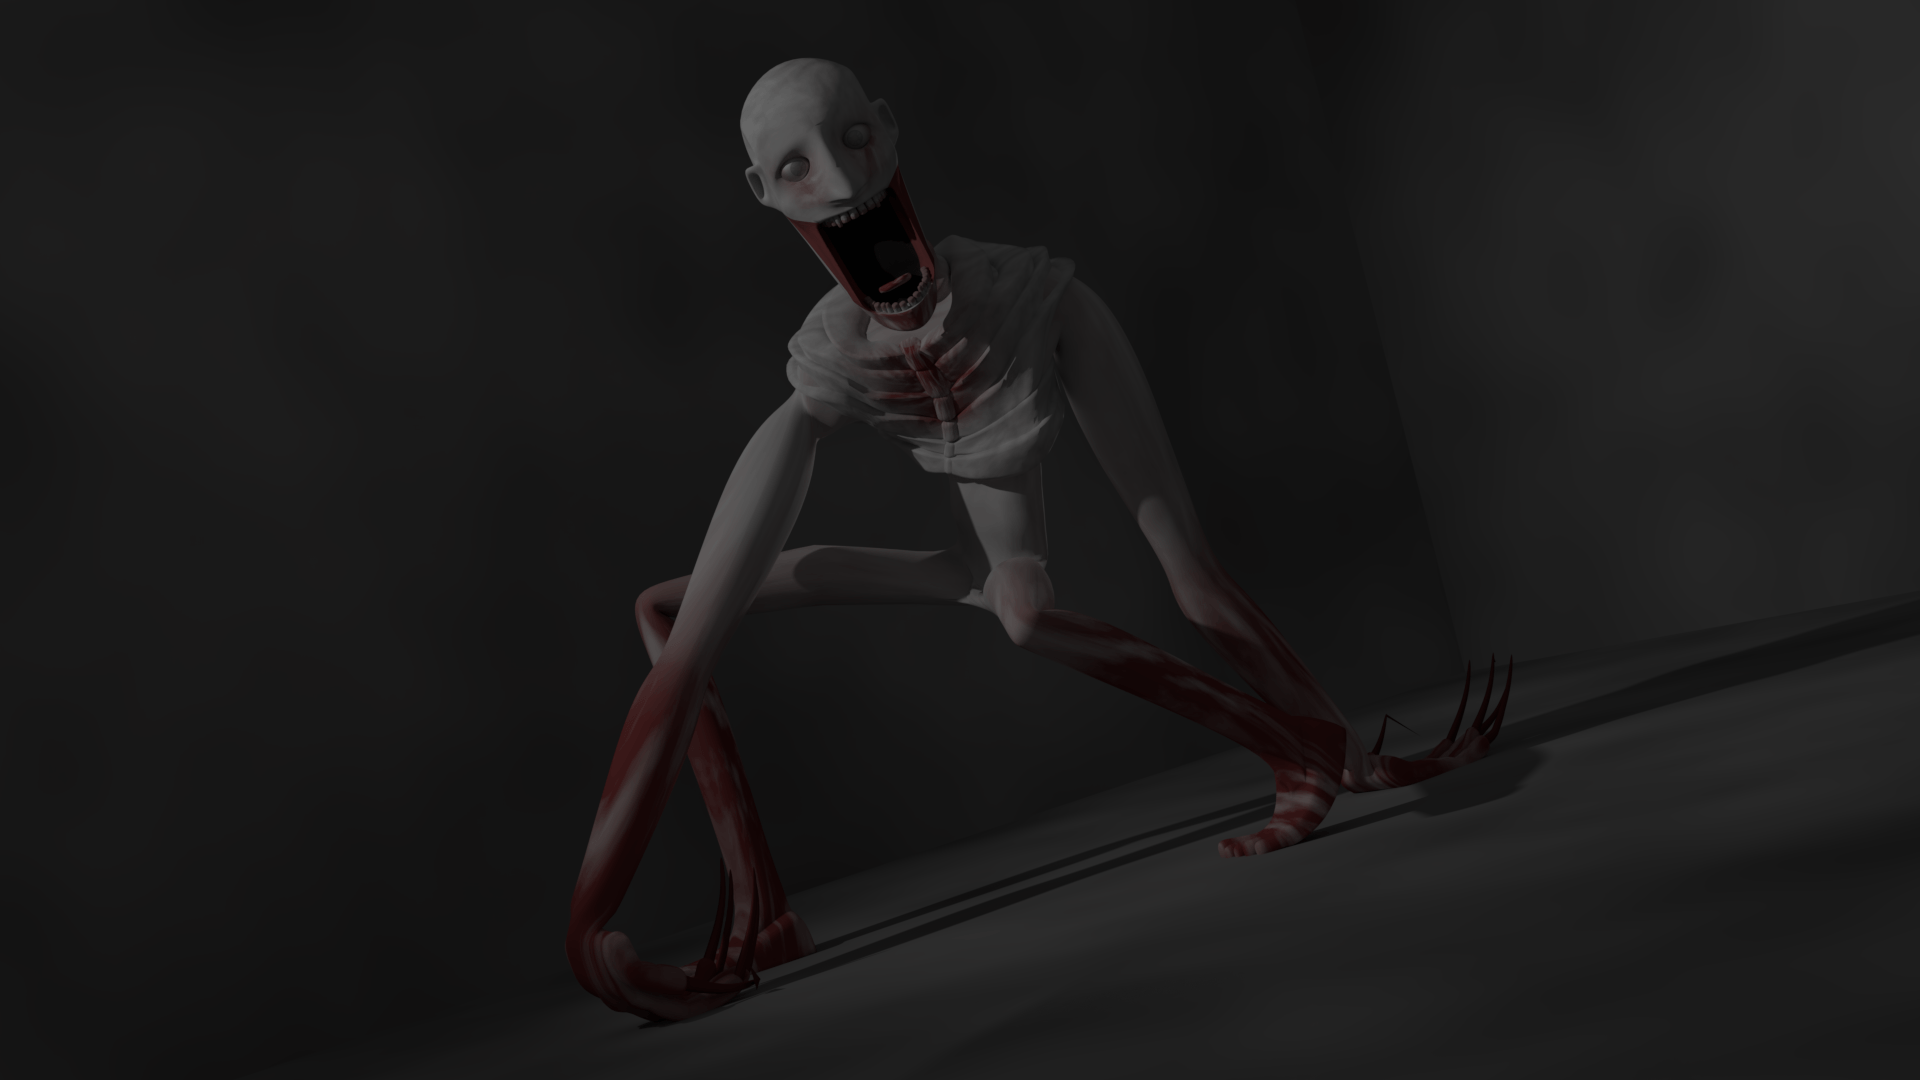 Free download SCP 096 View at your own risk [BLENDER] SCP